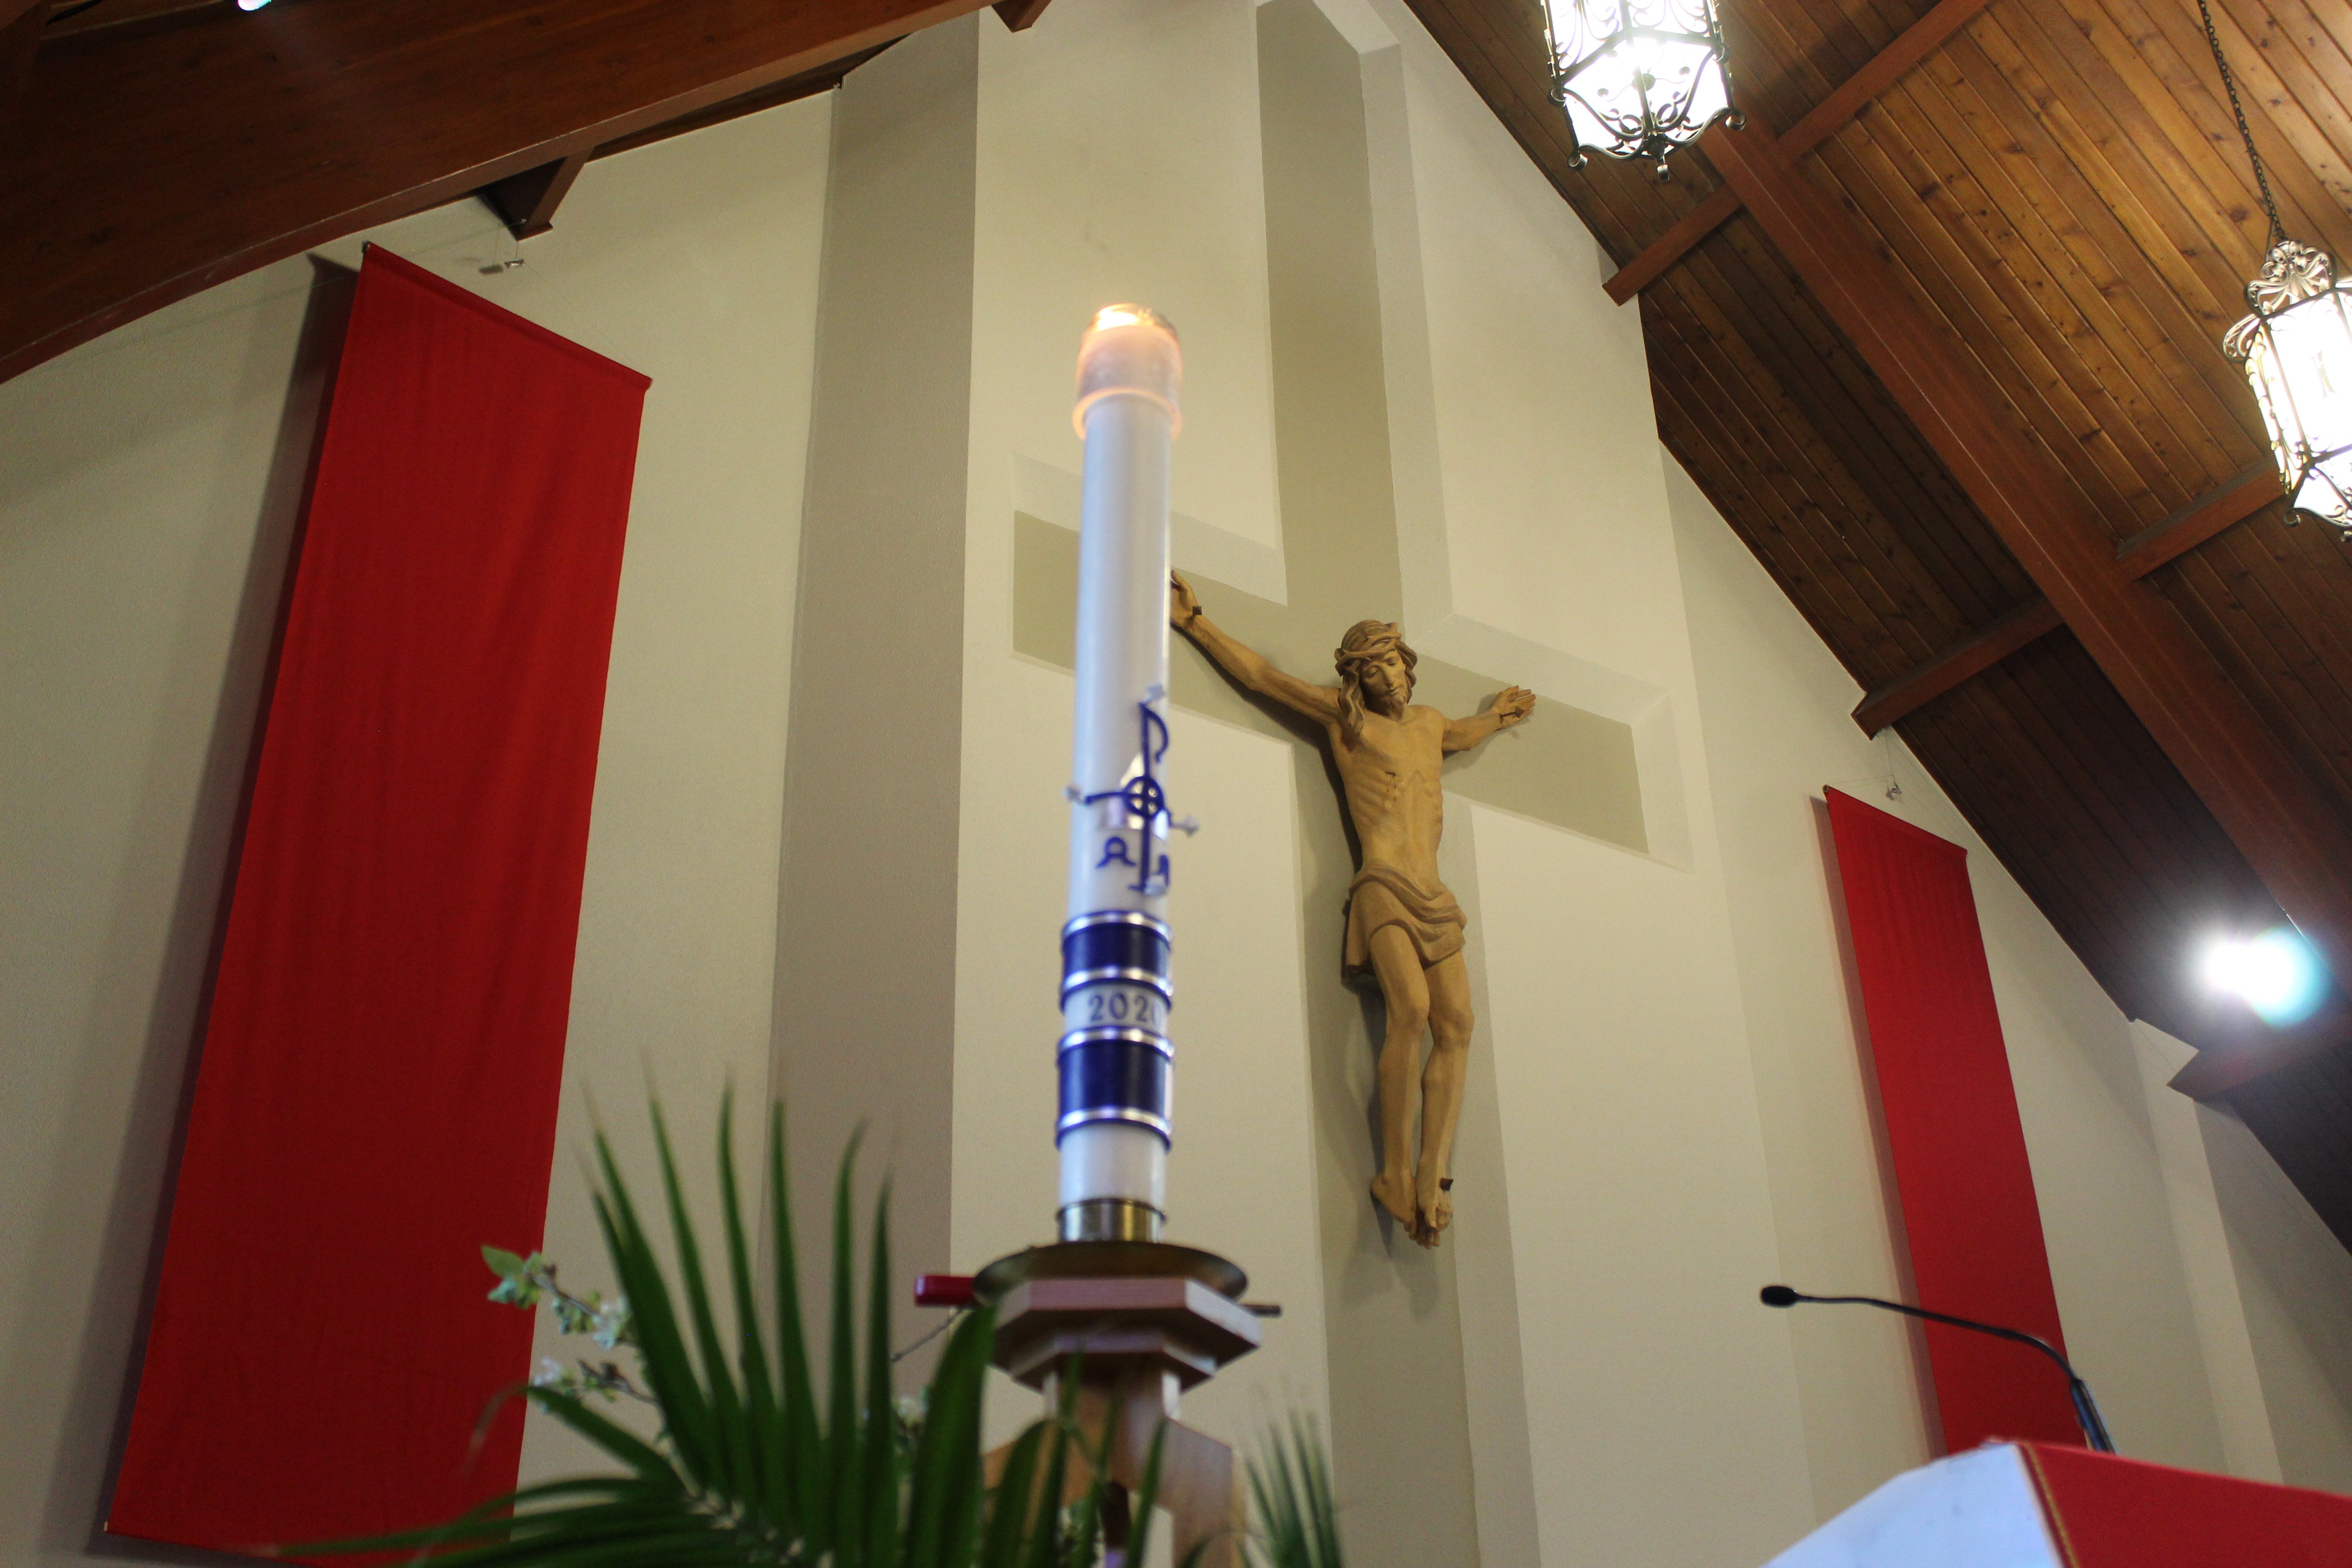 Image of the Main Crucifix of St. Jude's with red banners on each side of the crucifix, with the paschal candle also in frame, the photo taken from the left side of the sanctuary.